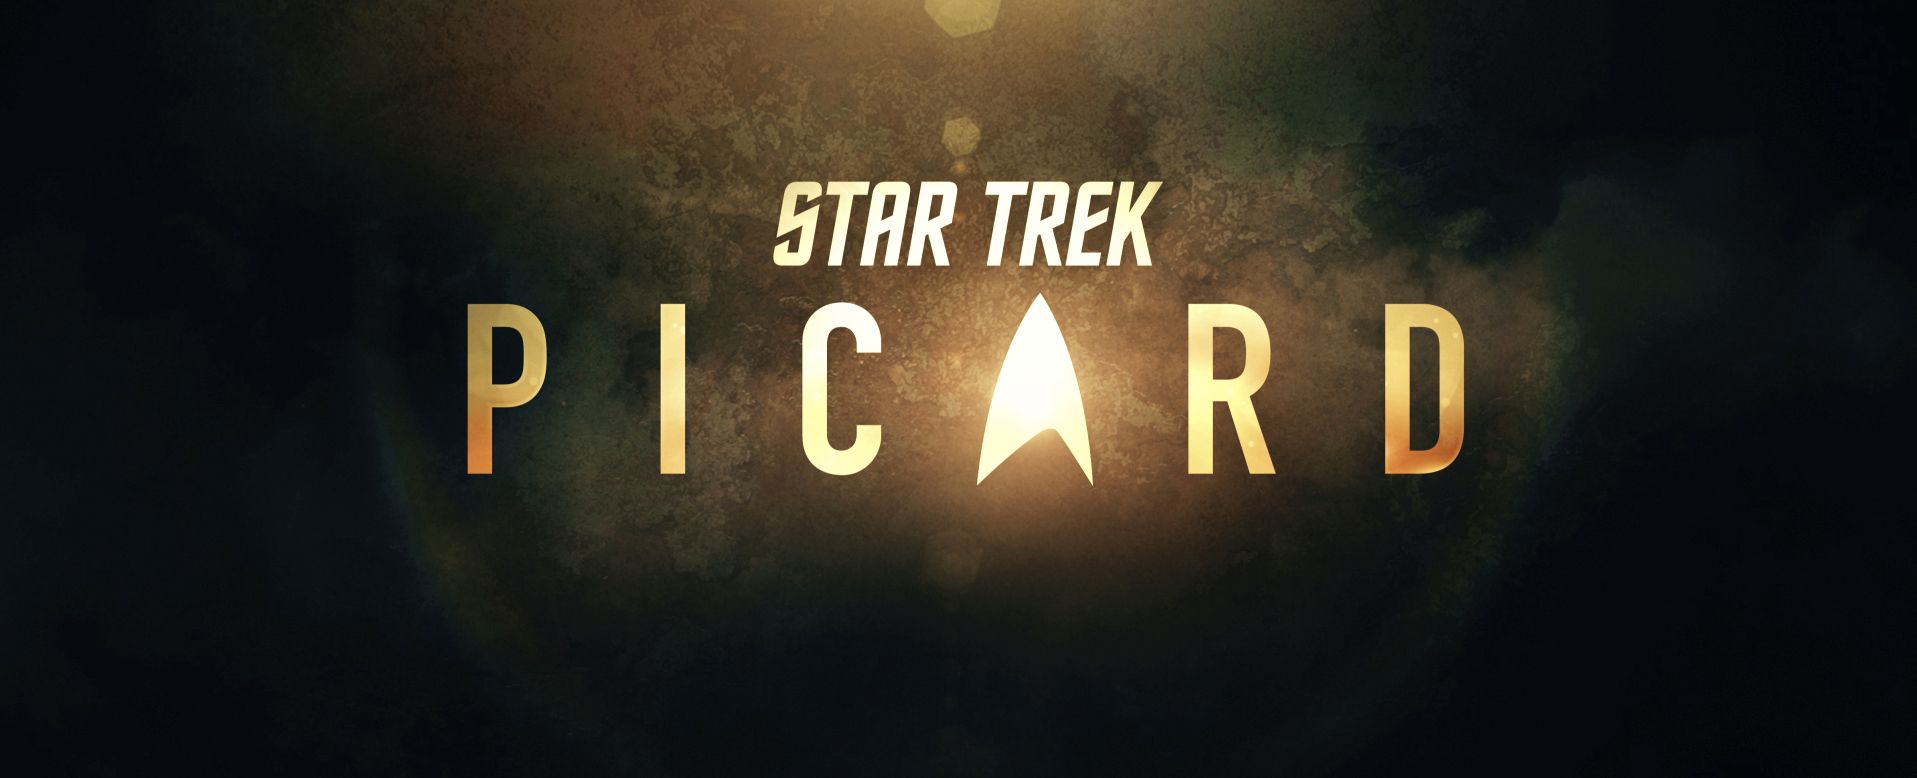 Star Trek Picard Series Gets Official Title and Logo | Collider